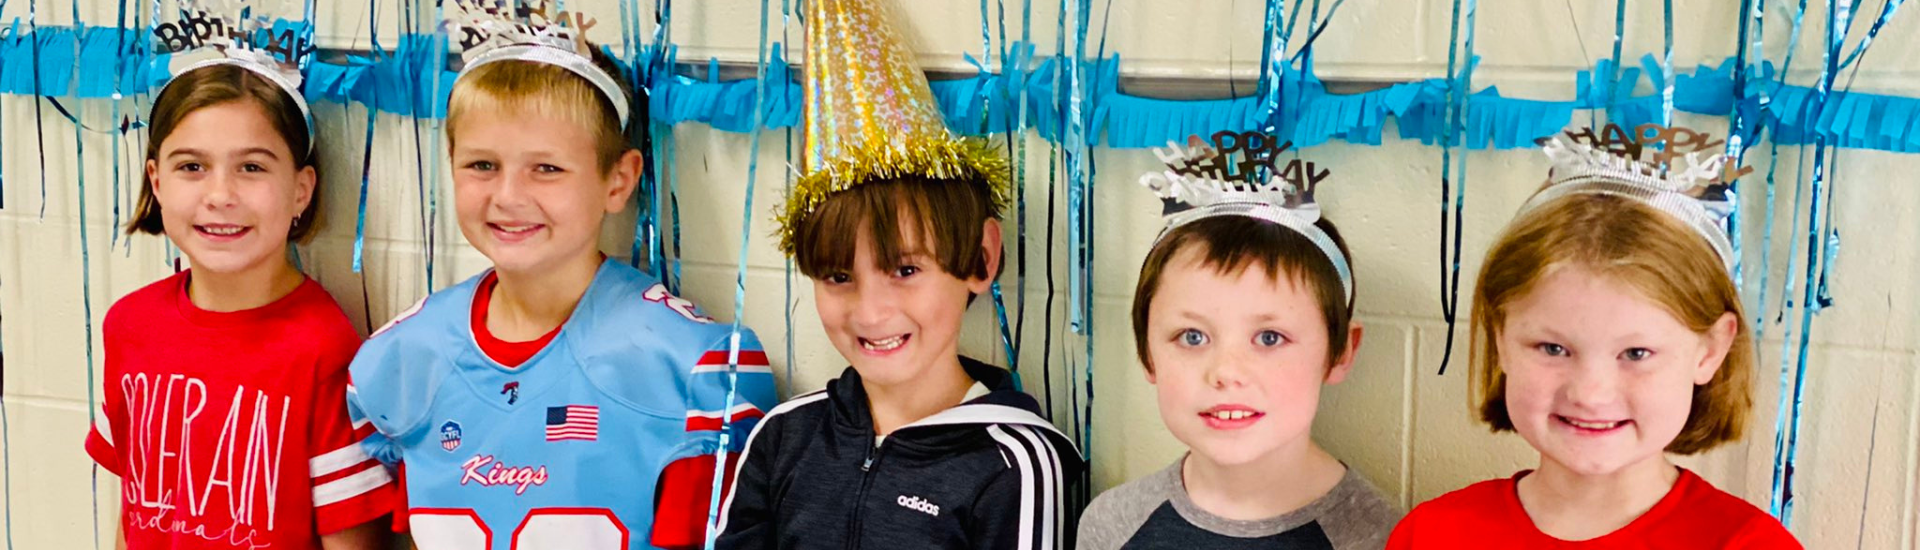 Five third grade students posing with birthday hats on